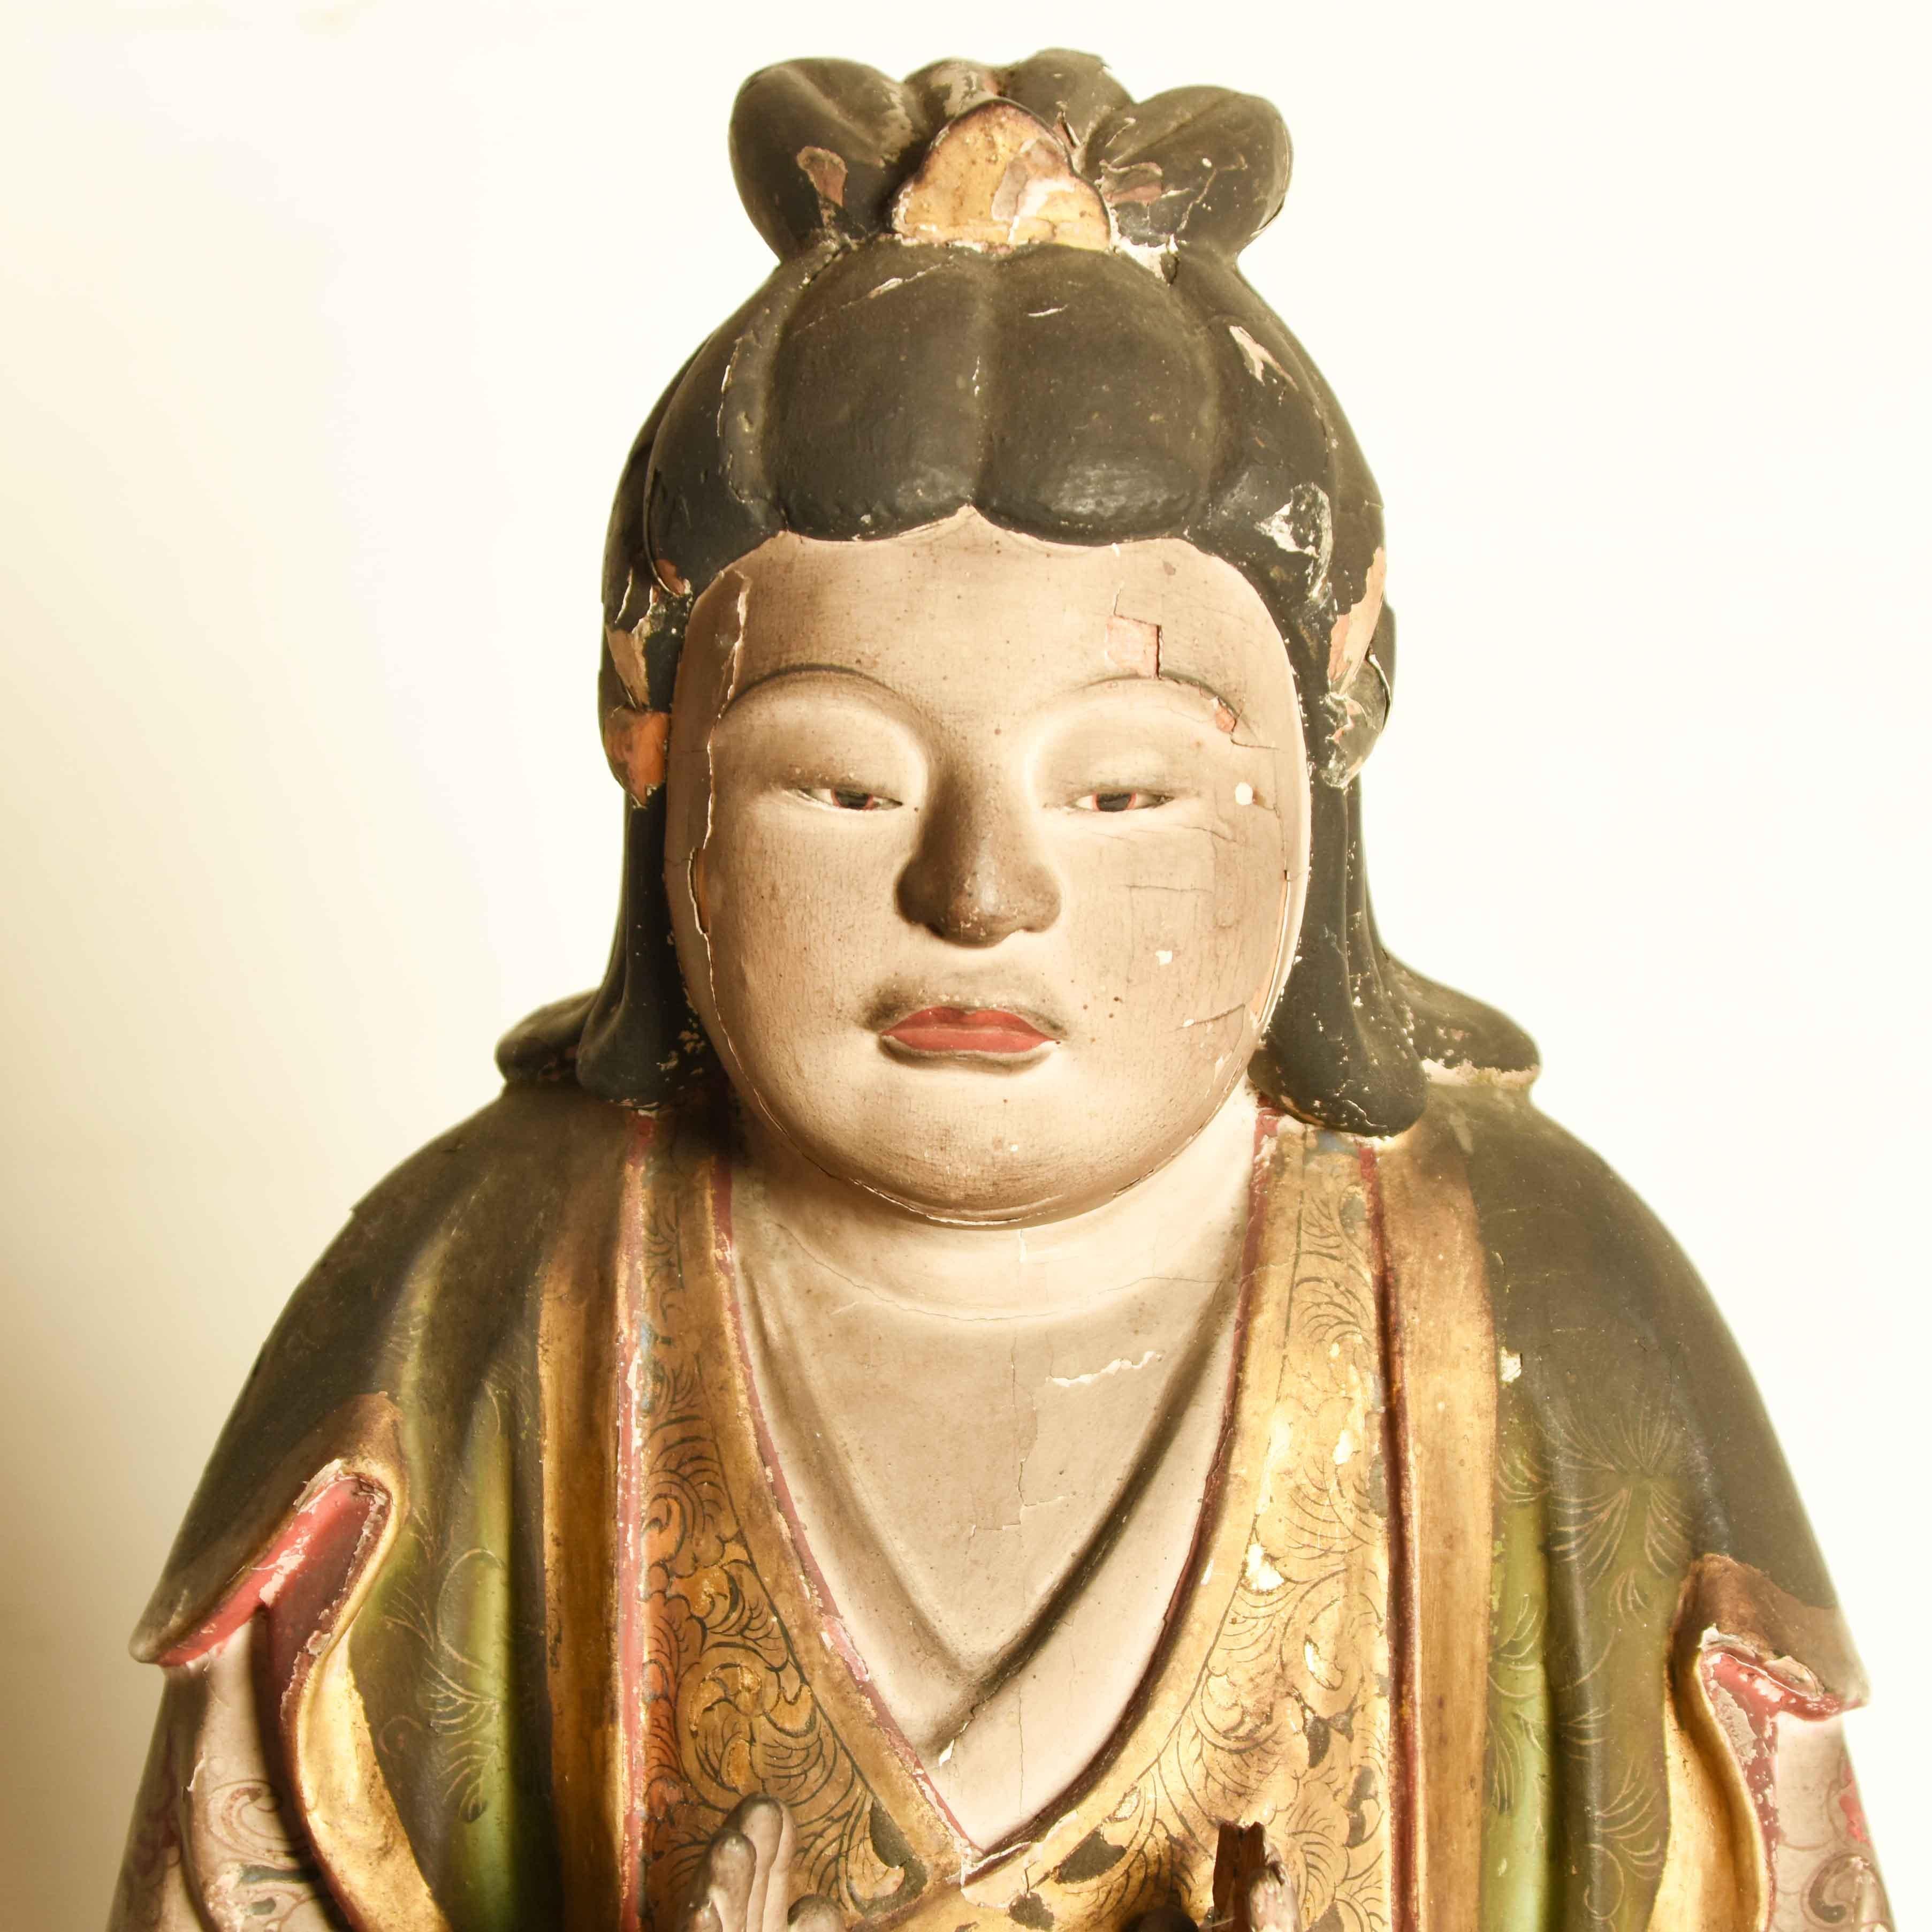 A Japanese statue of a Shinto god from the Momoyama period. Hand carved from wood with a layer of gesso and hand painted flowing robes with delicately wrought, colorful designs including a lotus on the centre panel. The deity has been created with